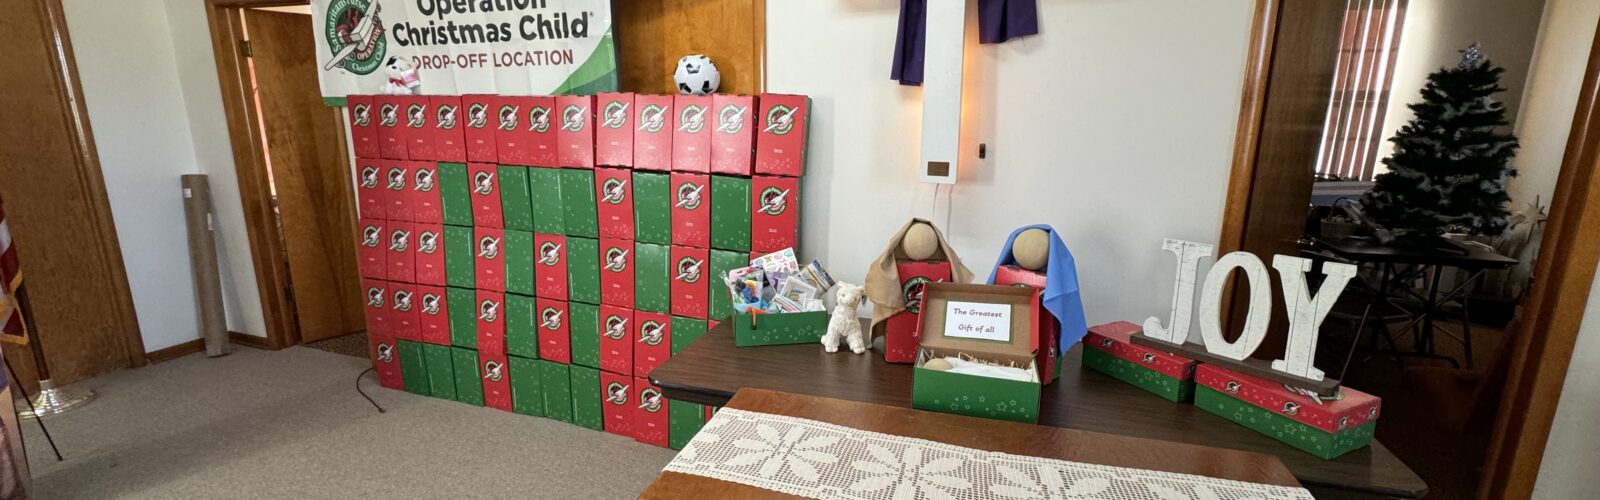 OCC Boxes In A Church